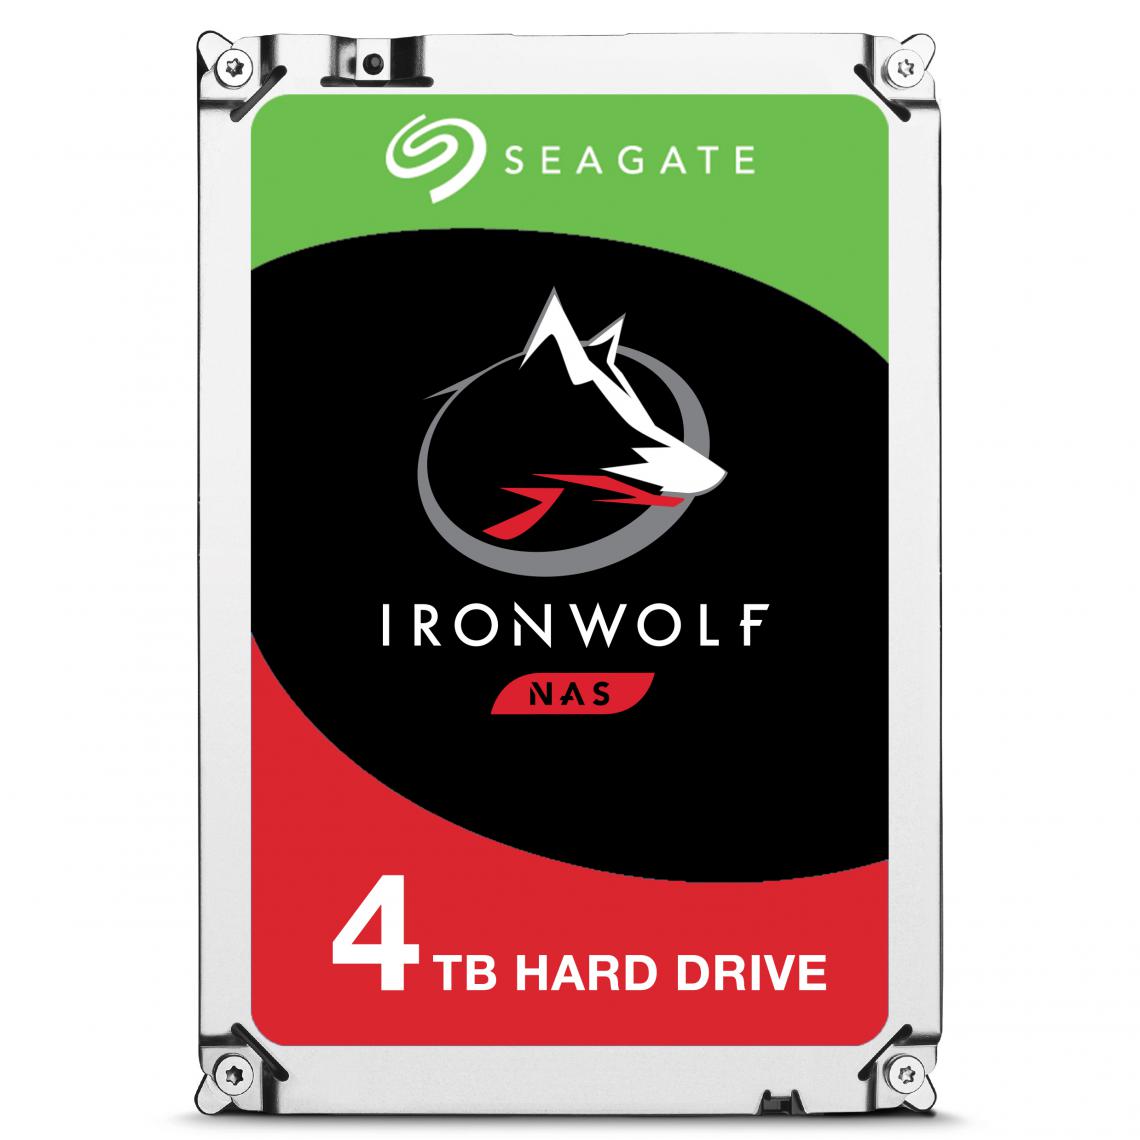 Seagate - NAS HDD 4To IronWolf single NAS HDD 4To IronWolf 5900rpm 6Gb/s SATA 64MB cache 3.5p 24x7 for NAS and RAID rackmount systemes BLK single pack - Disque Dur interne